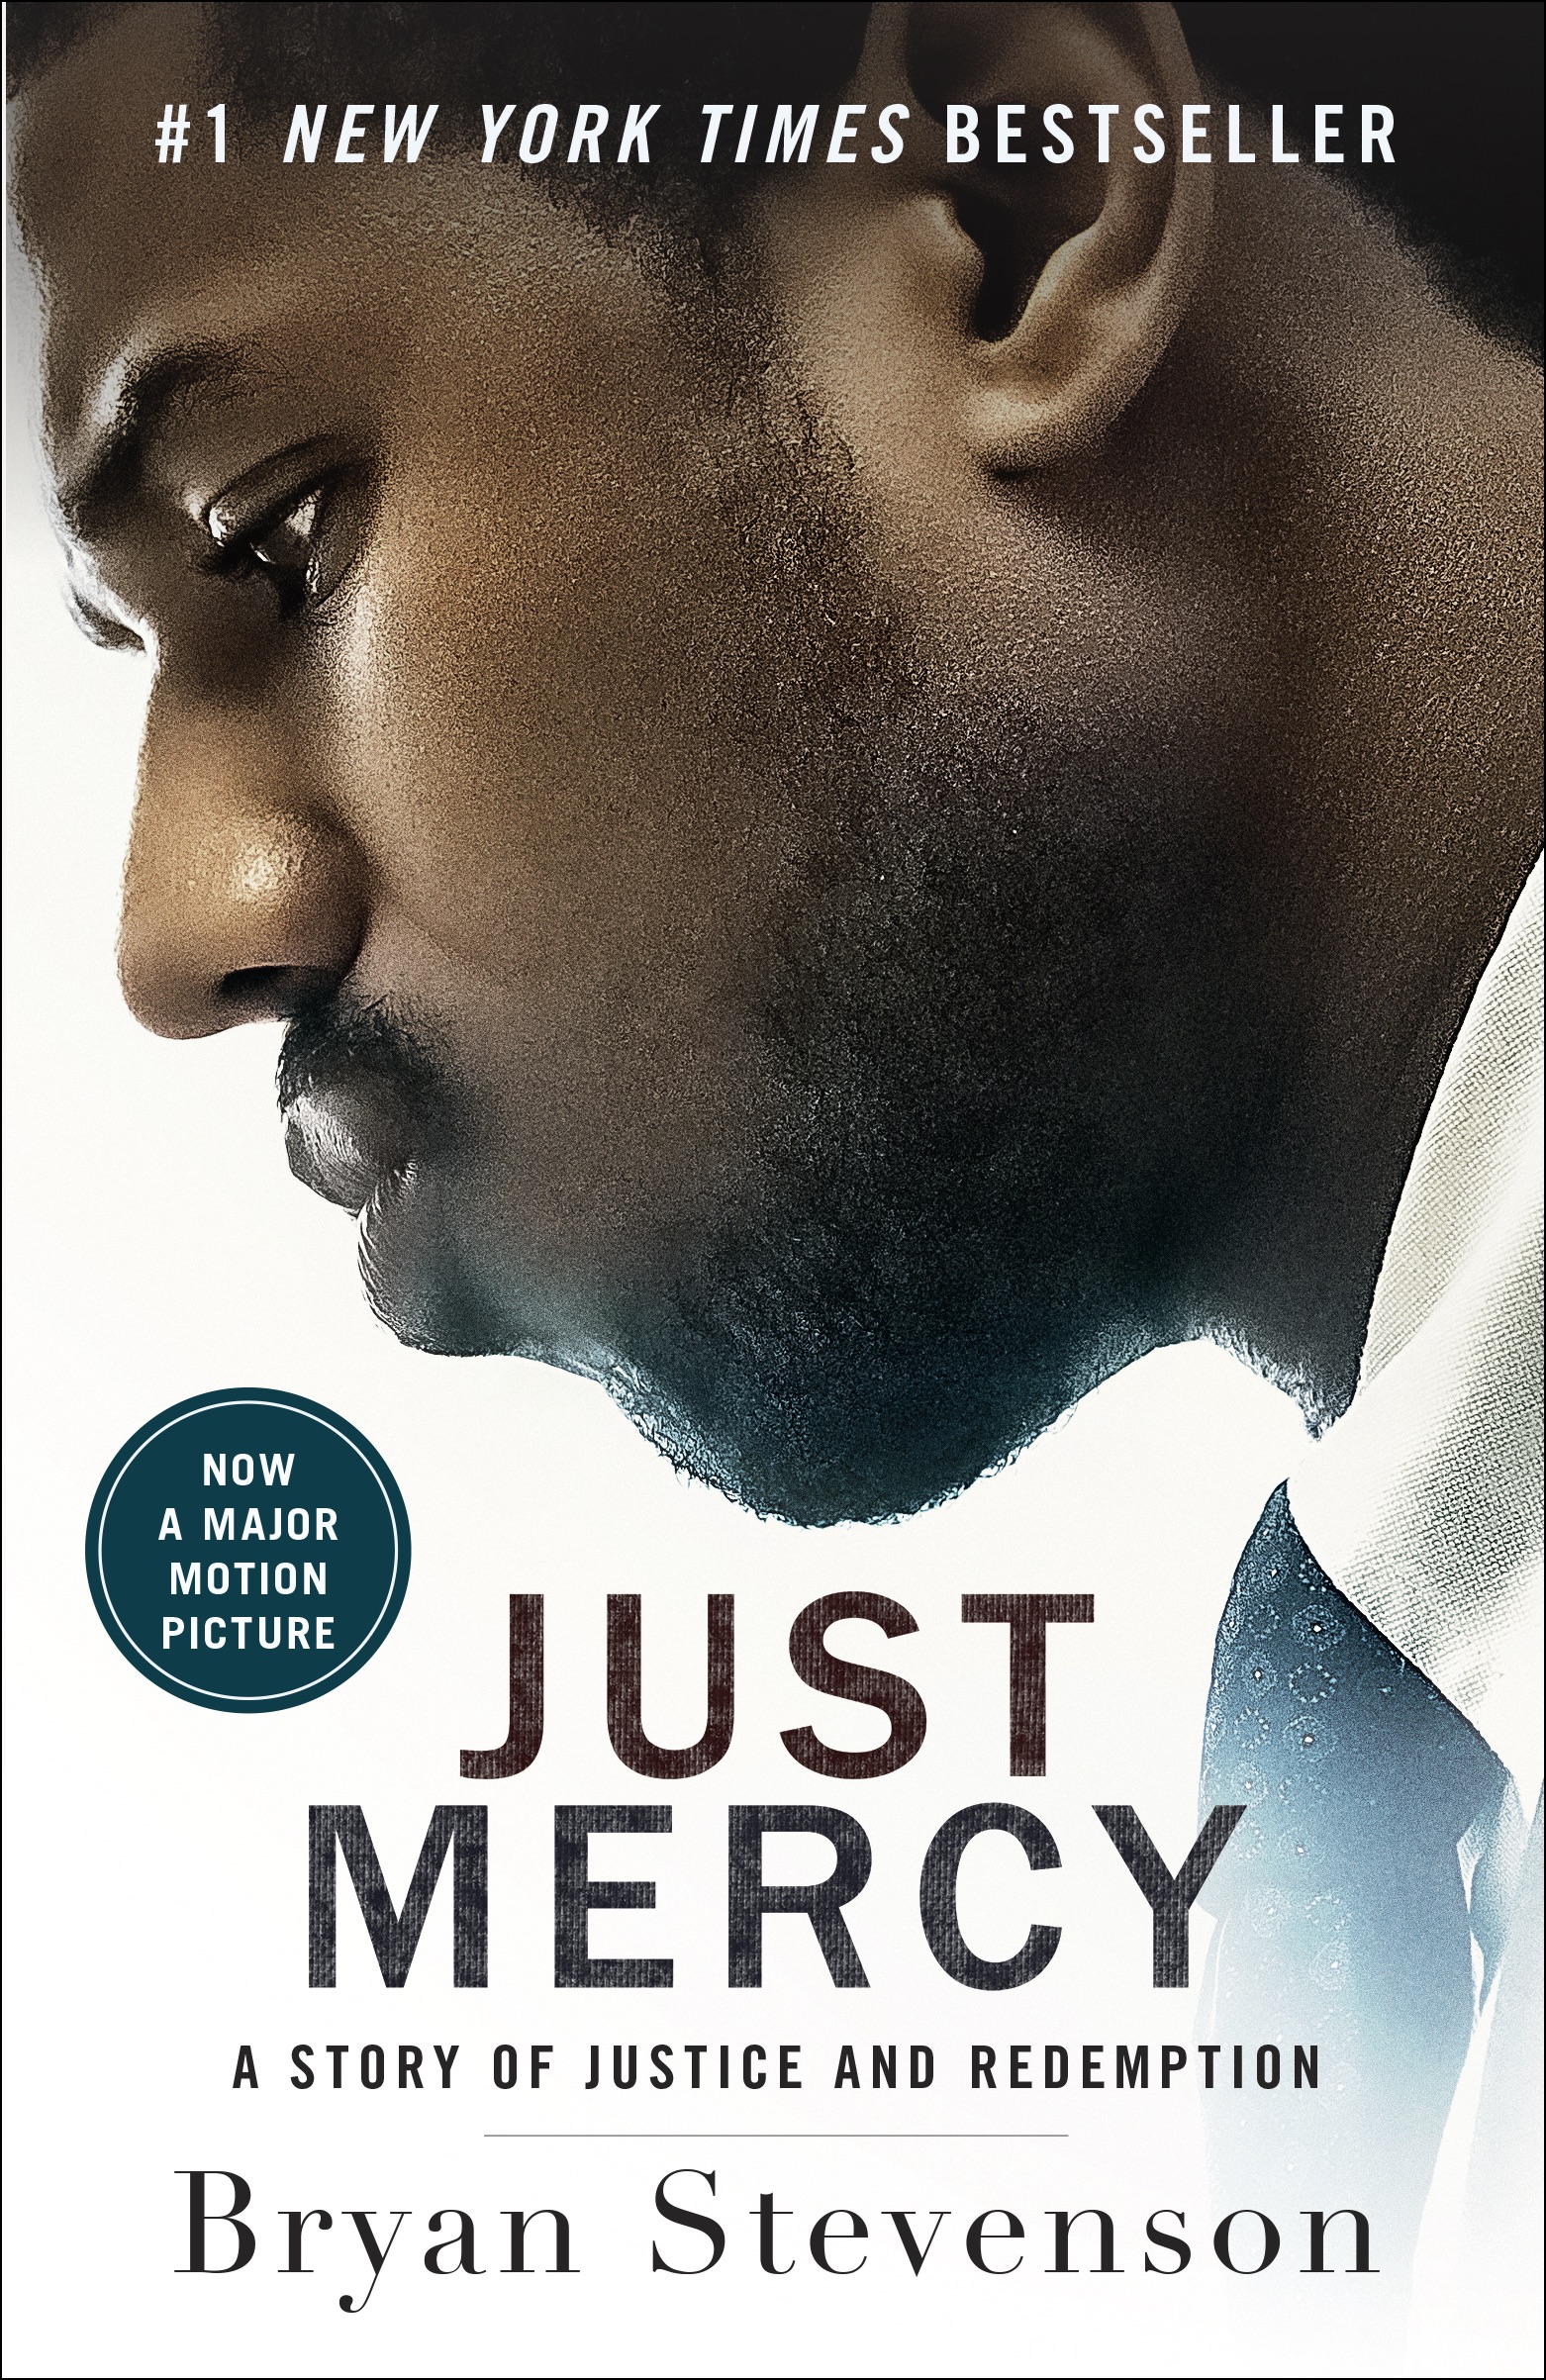 book review on just mercy